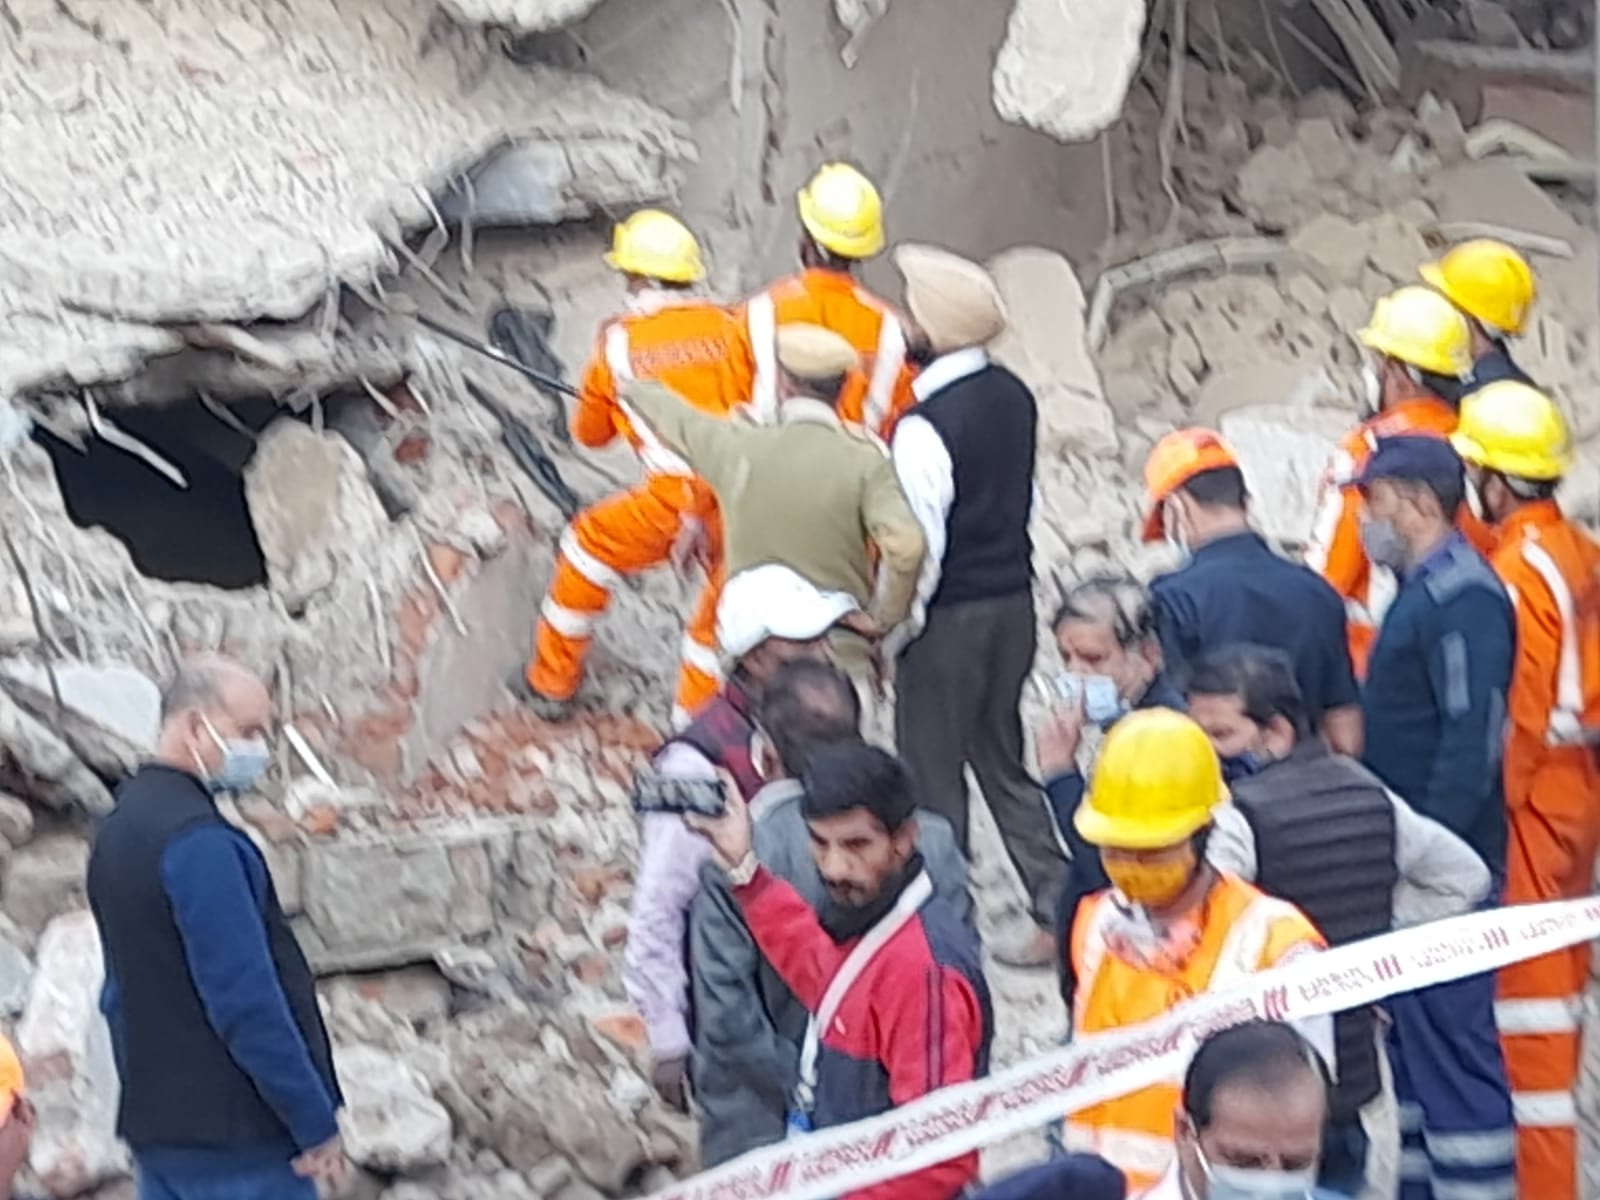 Police registered a case in the building collapse case in Parwanoo